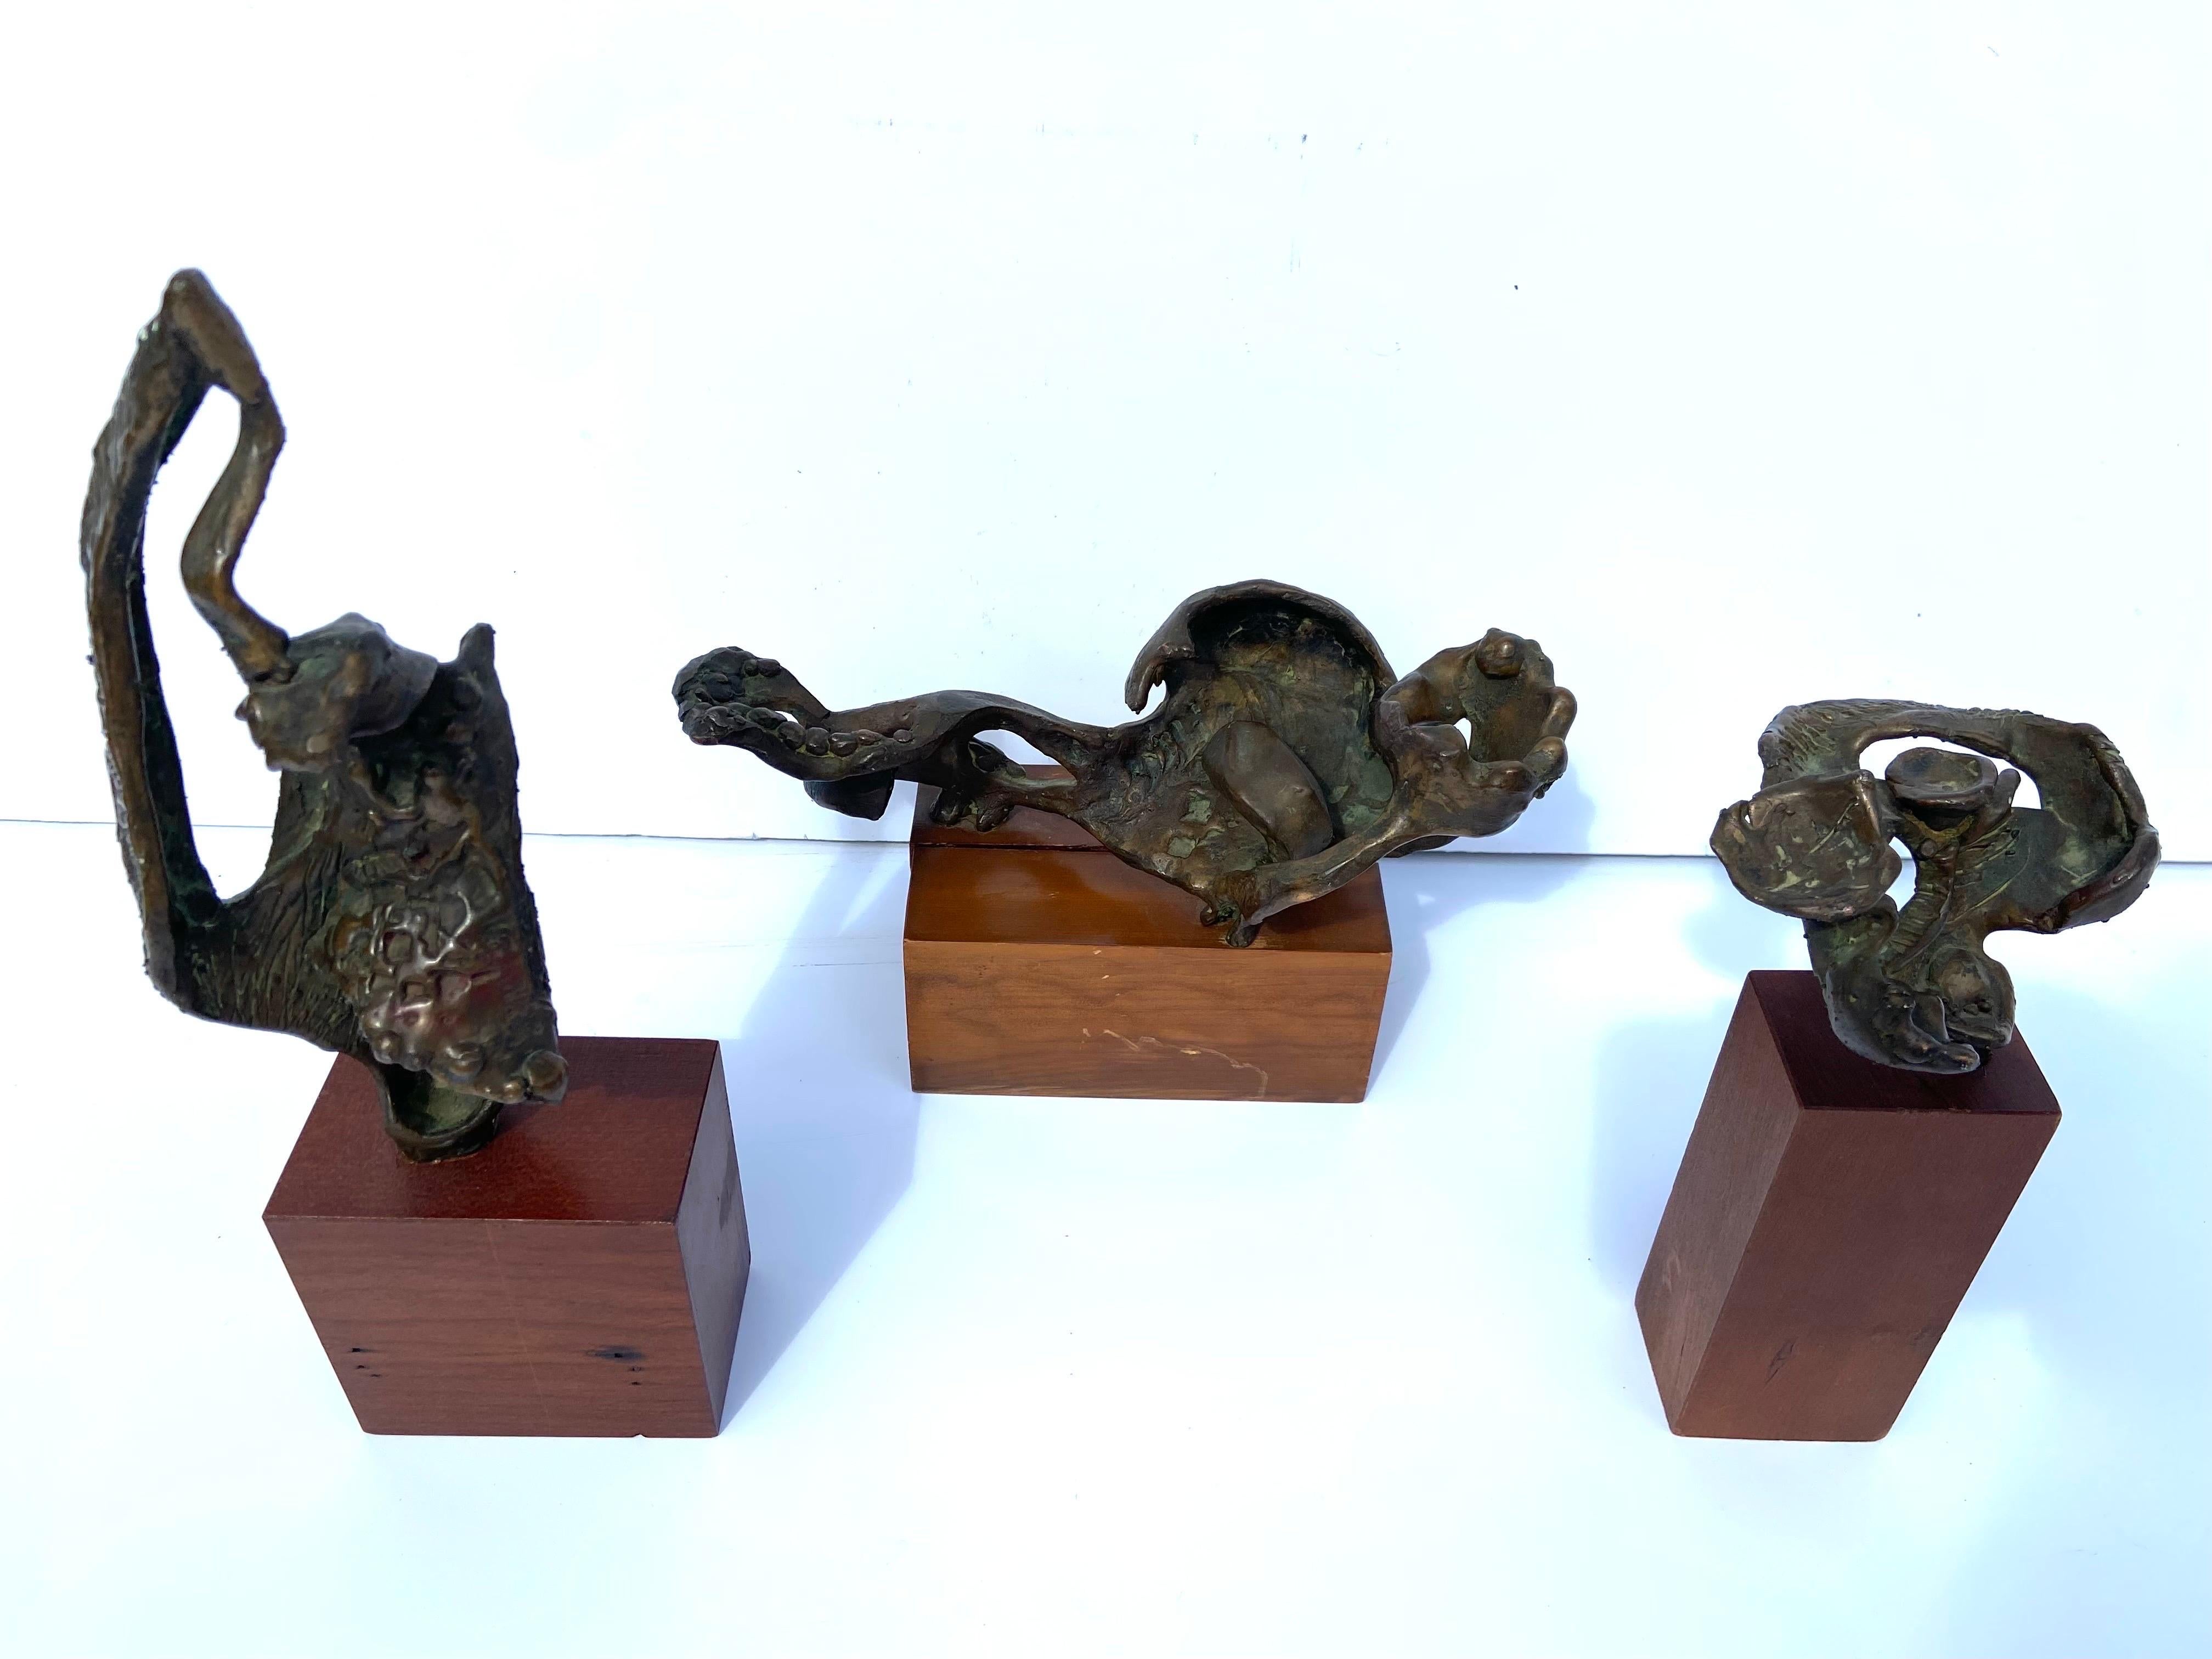 A 20th century era trio of brutalist / abstract style bronze sculptures on wood bases. Each of these sculptures has a strong texture as well as a free flowing form. As though caught in a transition from one shape to another. The pieces are unsigned.